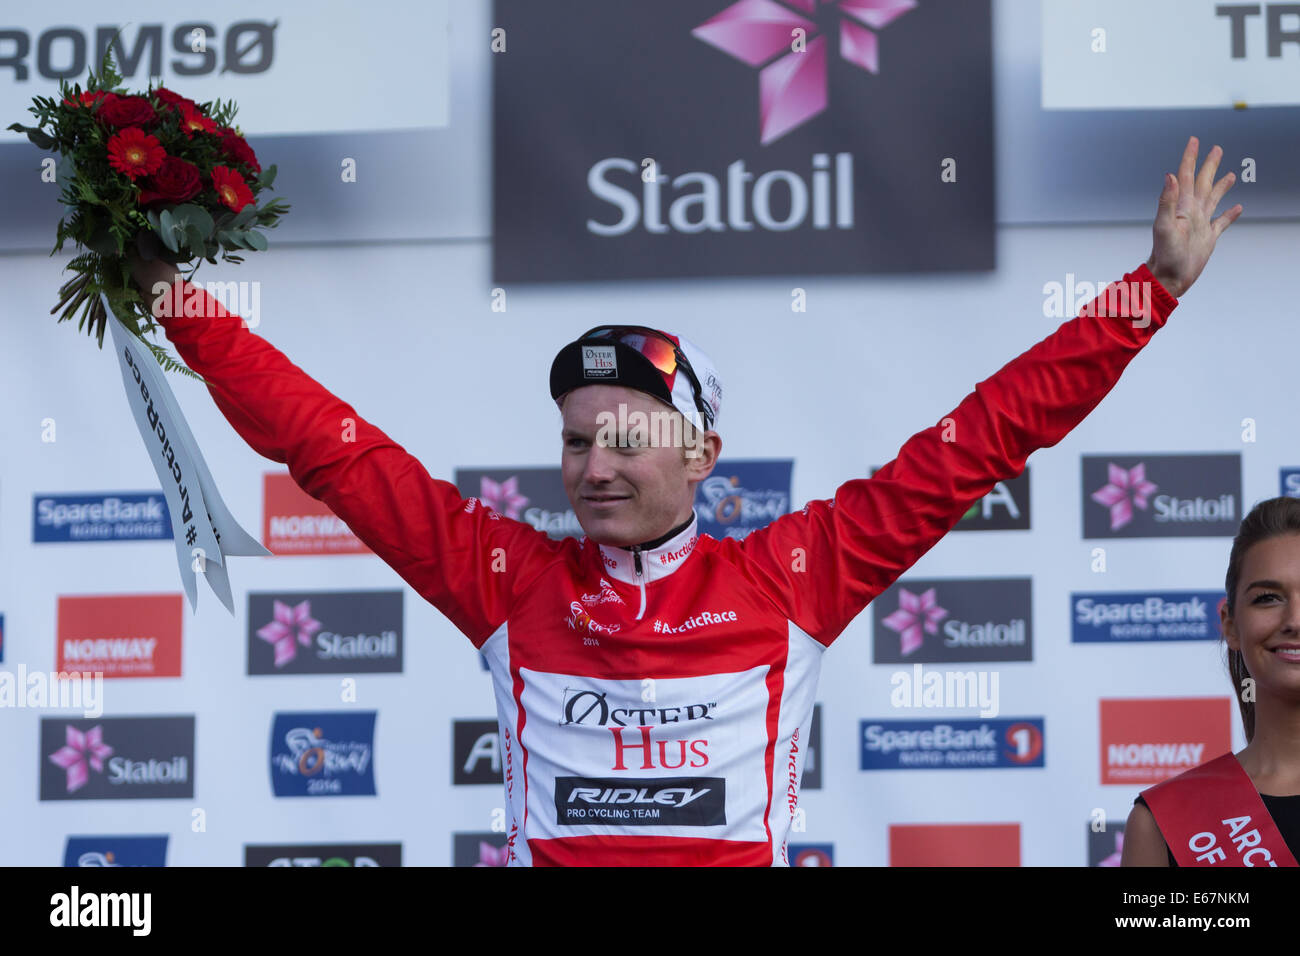 Tromsoe, Norway. 17th August, 2014. Arctic Race of Norway 2014, day 3 August Jensen (Team Osterhus-Ridley) celebrates as the best overall climber in arctic Race of Norway 2014. Foto: Ole Reidar Mathisen/Radarfoto/Alamy Live News Stock Photo